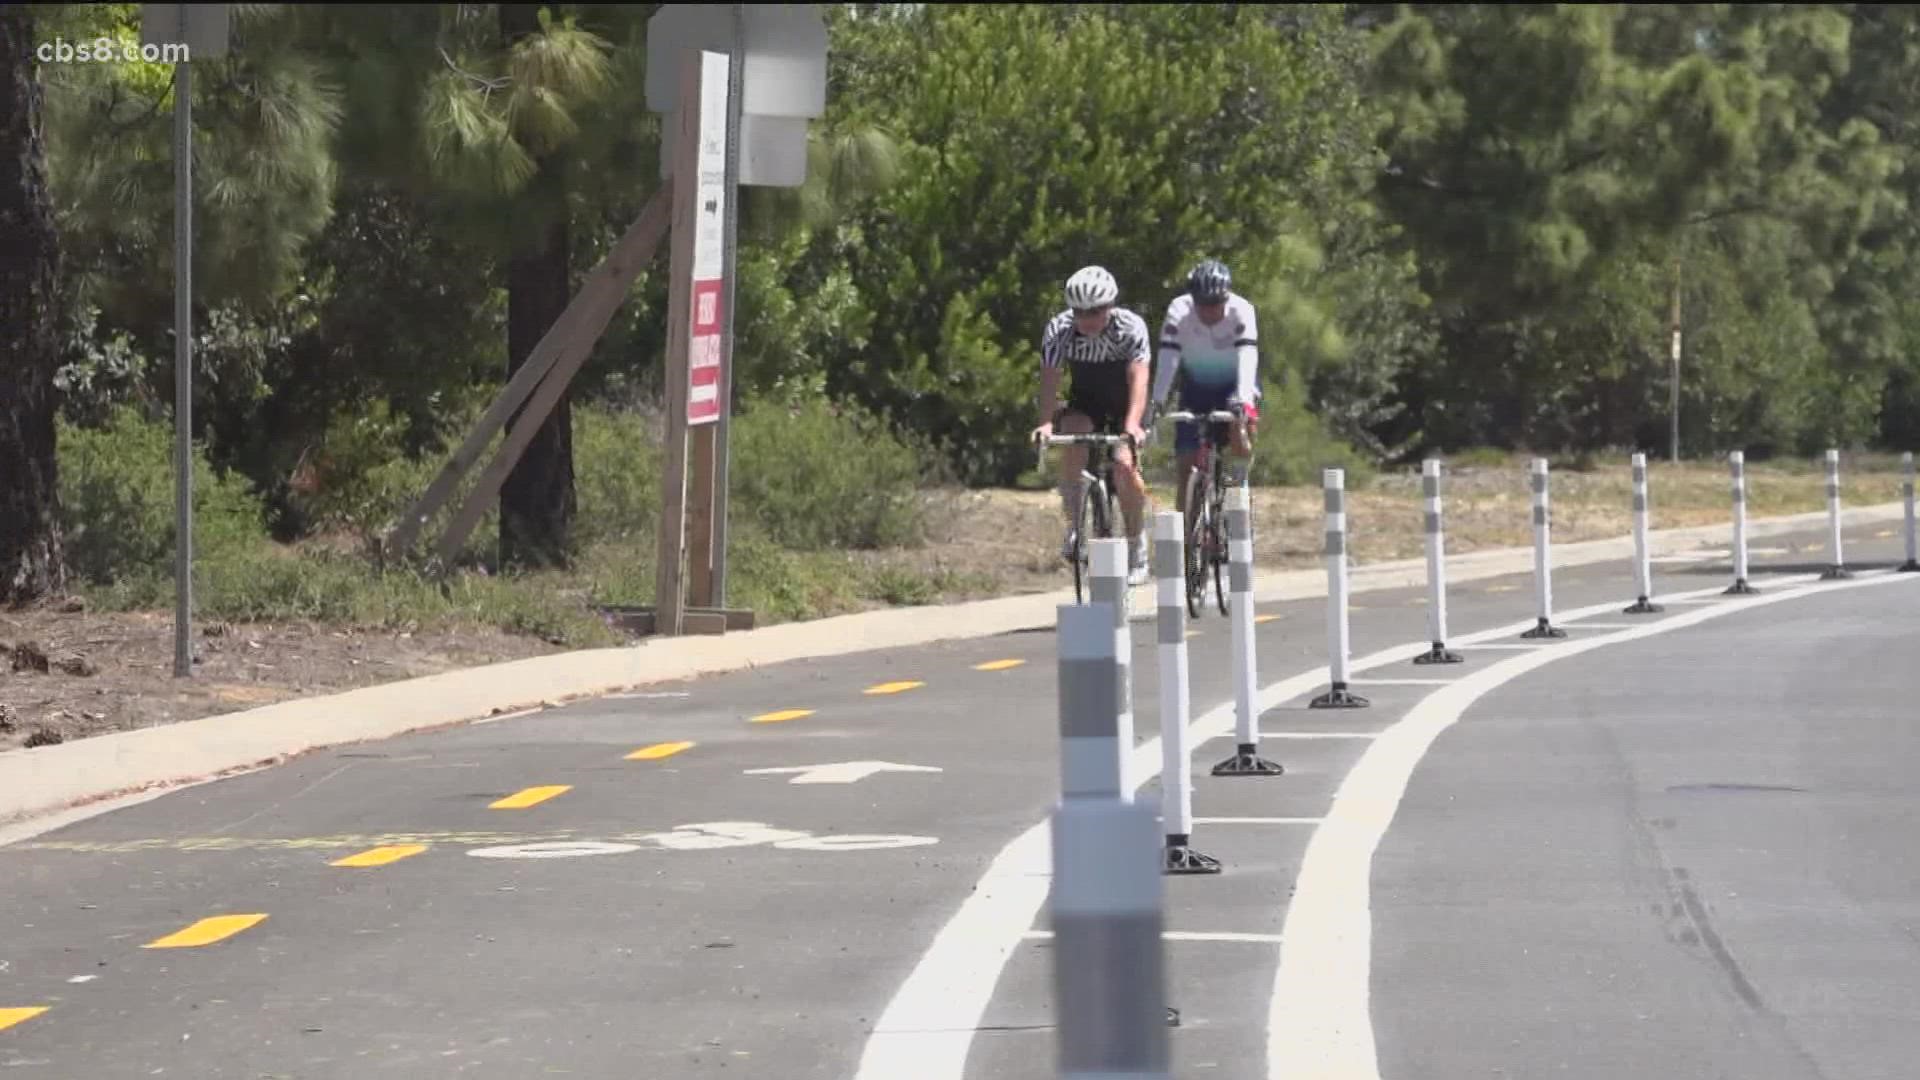 CBS 8 has been working for you since the bike lanes first appeared on Azuaga Street. Some say the lanes are needed, others complain the lanes took away parking.